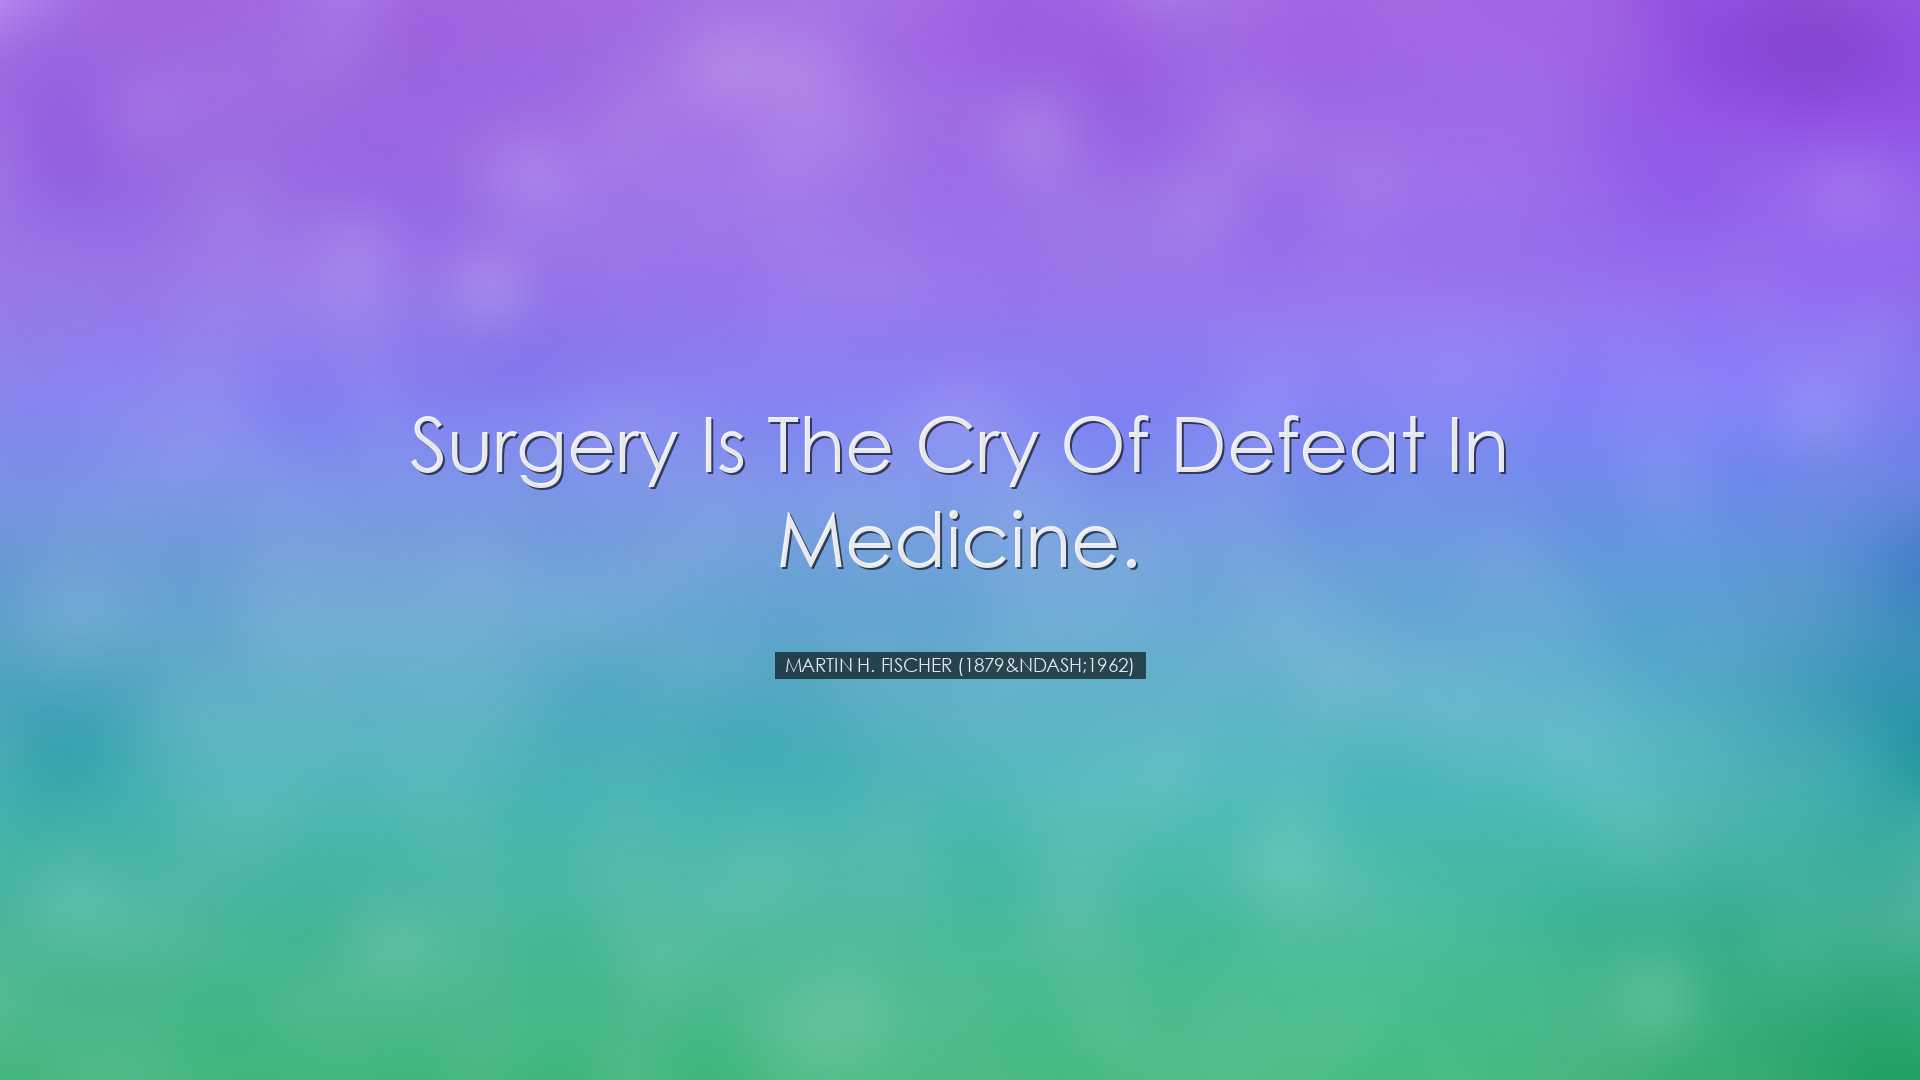 Surgery is the cry of defeat in medicine. - Martin H. Fischer (187